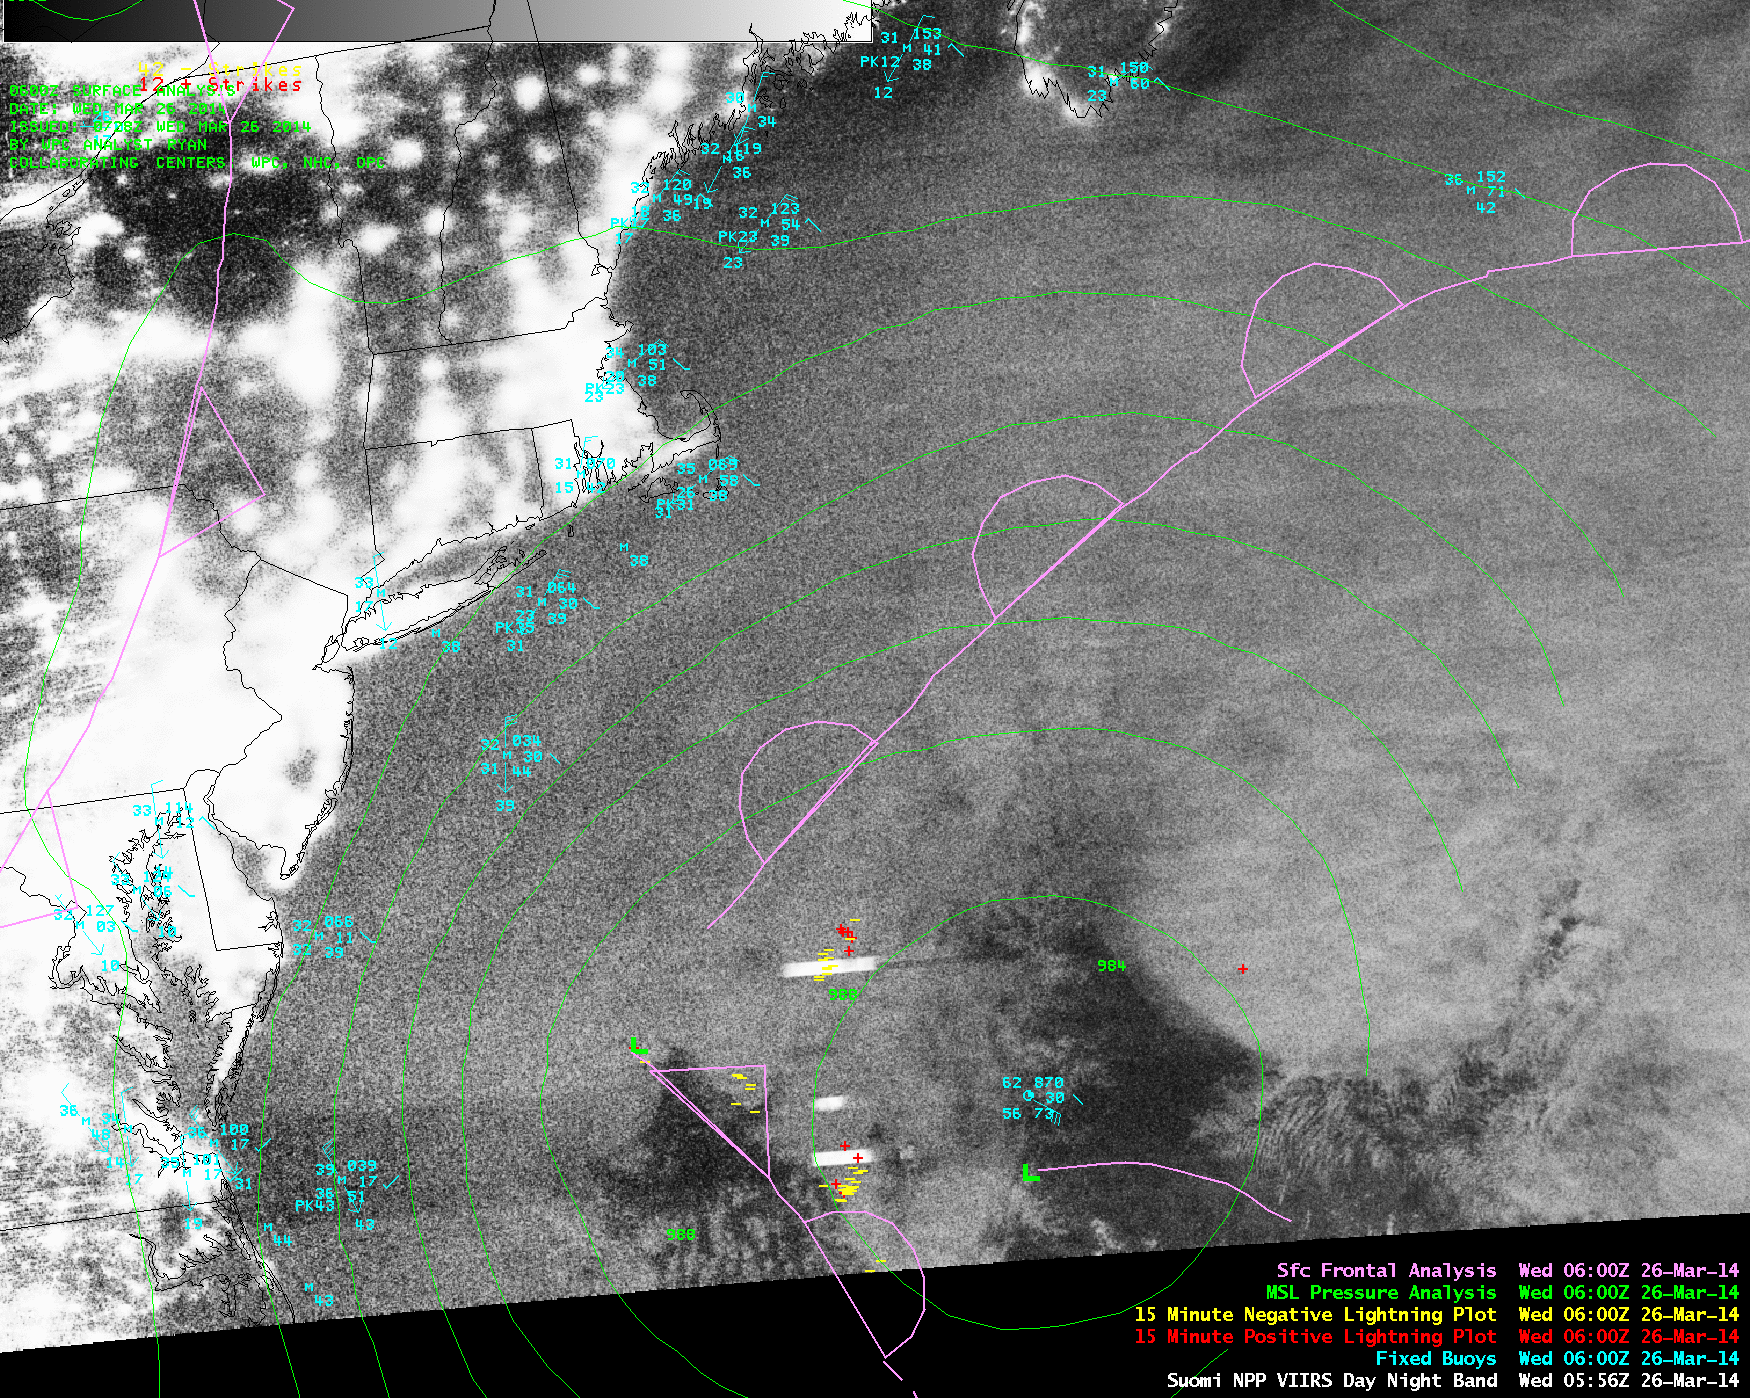 Suomi NPP VIIRS 0.7 Âµm Day/Night Band and 11.45 Âµm IR channel images at 05:56 UTC